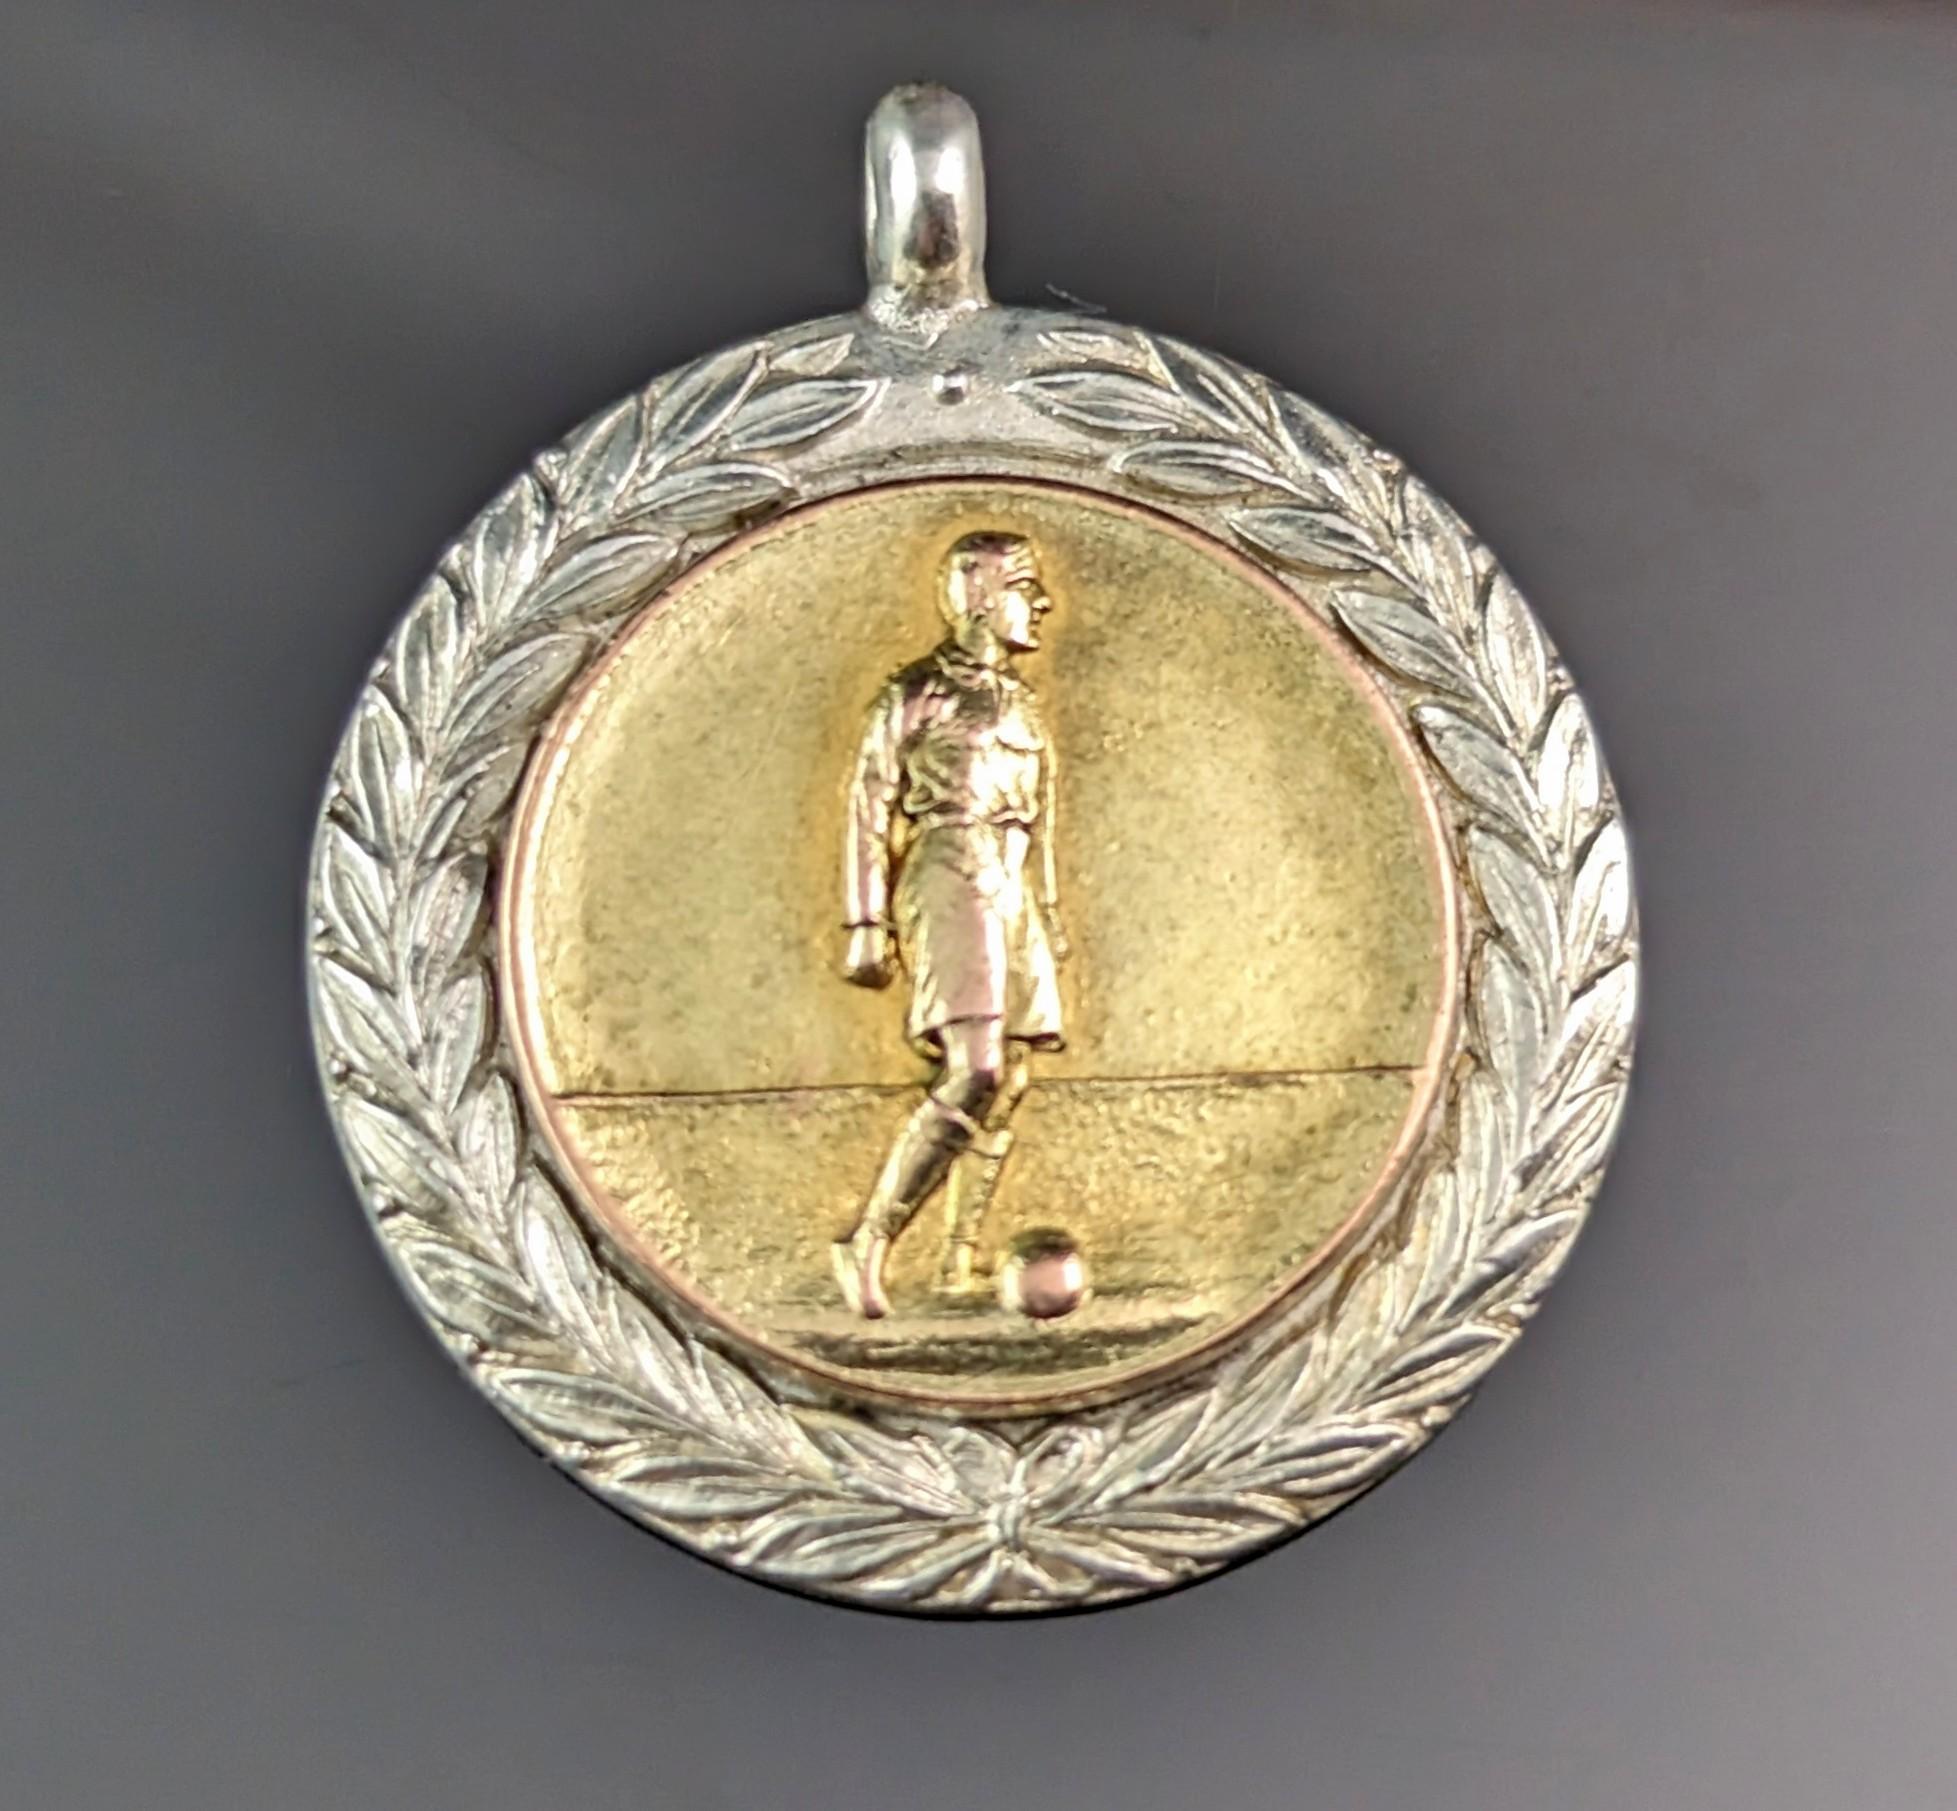 An attractive vintage, Art Deco era silver and gilt silver watch fob pendant.

It is a circular shaped fob with a Laurel wreath border in silver and the central area decorated with a repousse figure of a man with a football and gilded in a rich